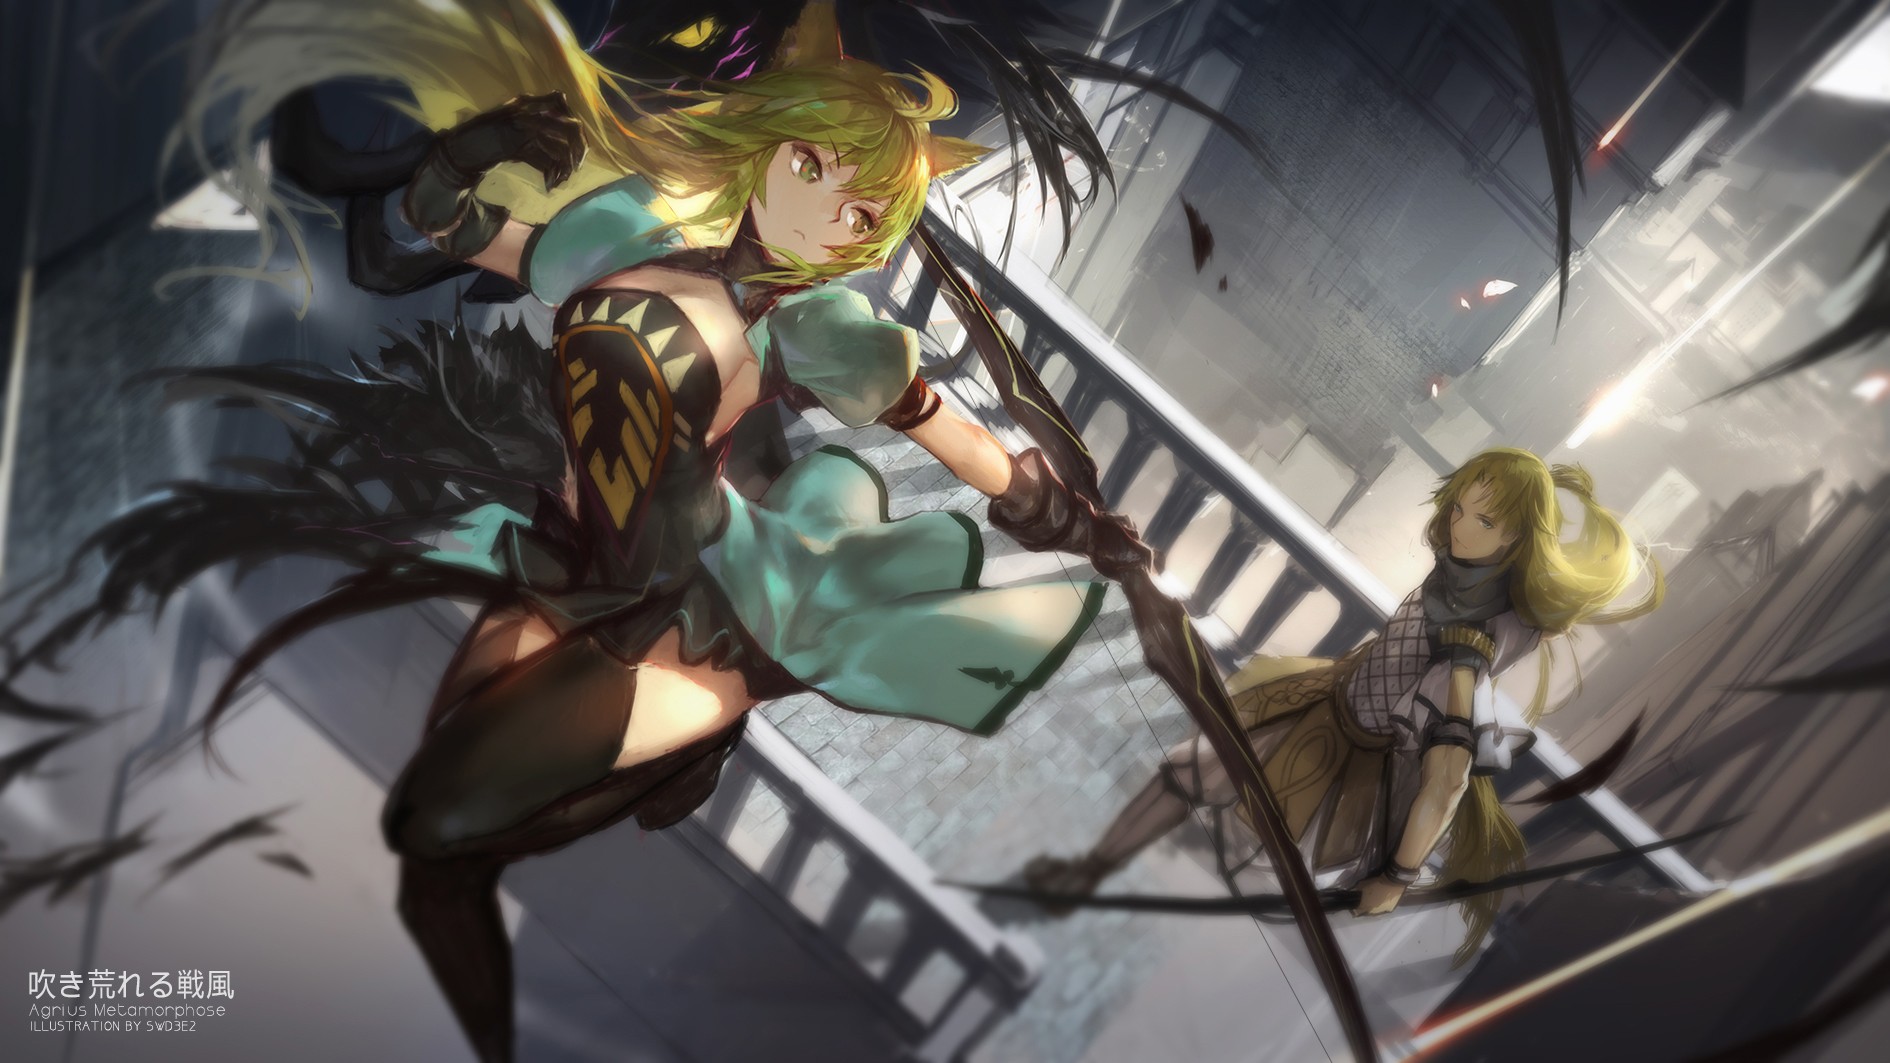 Anime Girls Swd3e2 Fate Apocrypha Fate Series Thigh Highs Bow And Arrow Archer Fate Apocrypha Blonde 1890x1063